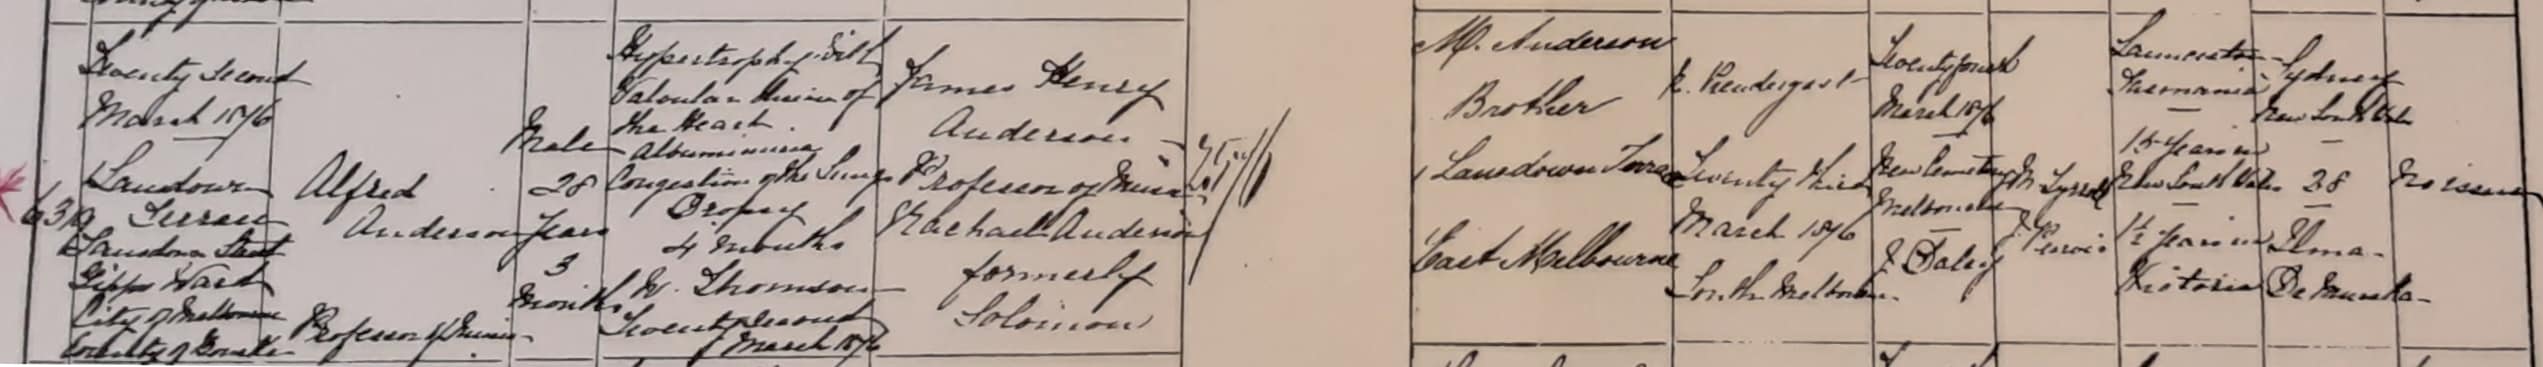 Death registration, Alfred Anderson, 22 March 1876